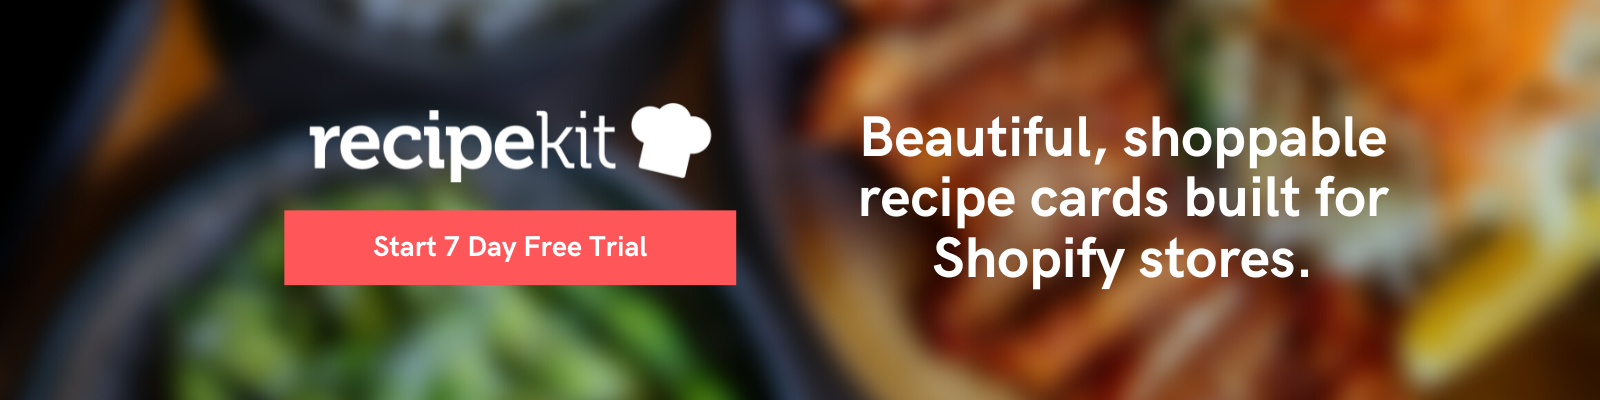 Recipe Kit makes it easy to create word-of-mouth marketing recipe cards for your Shopify store.